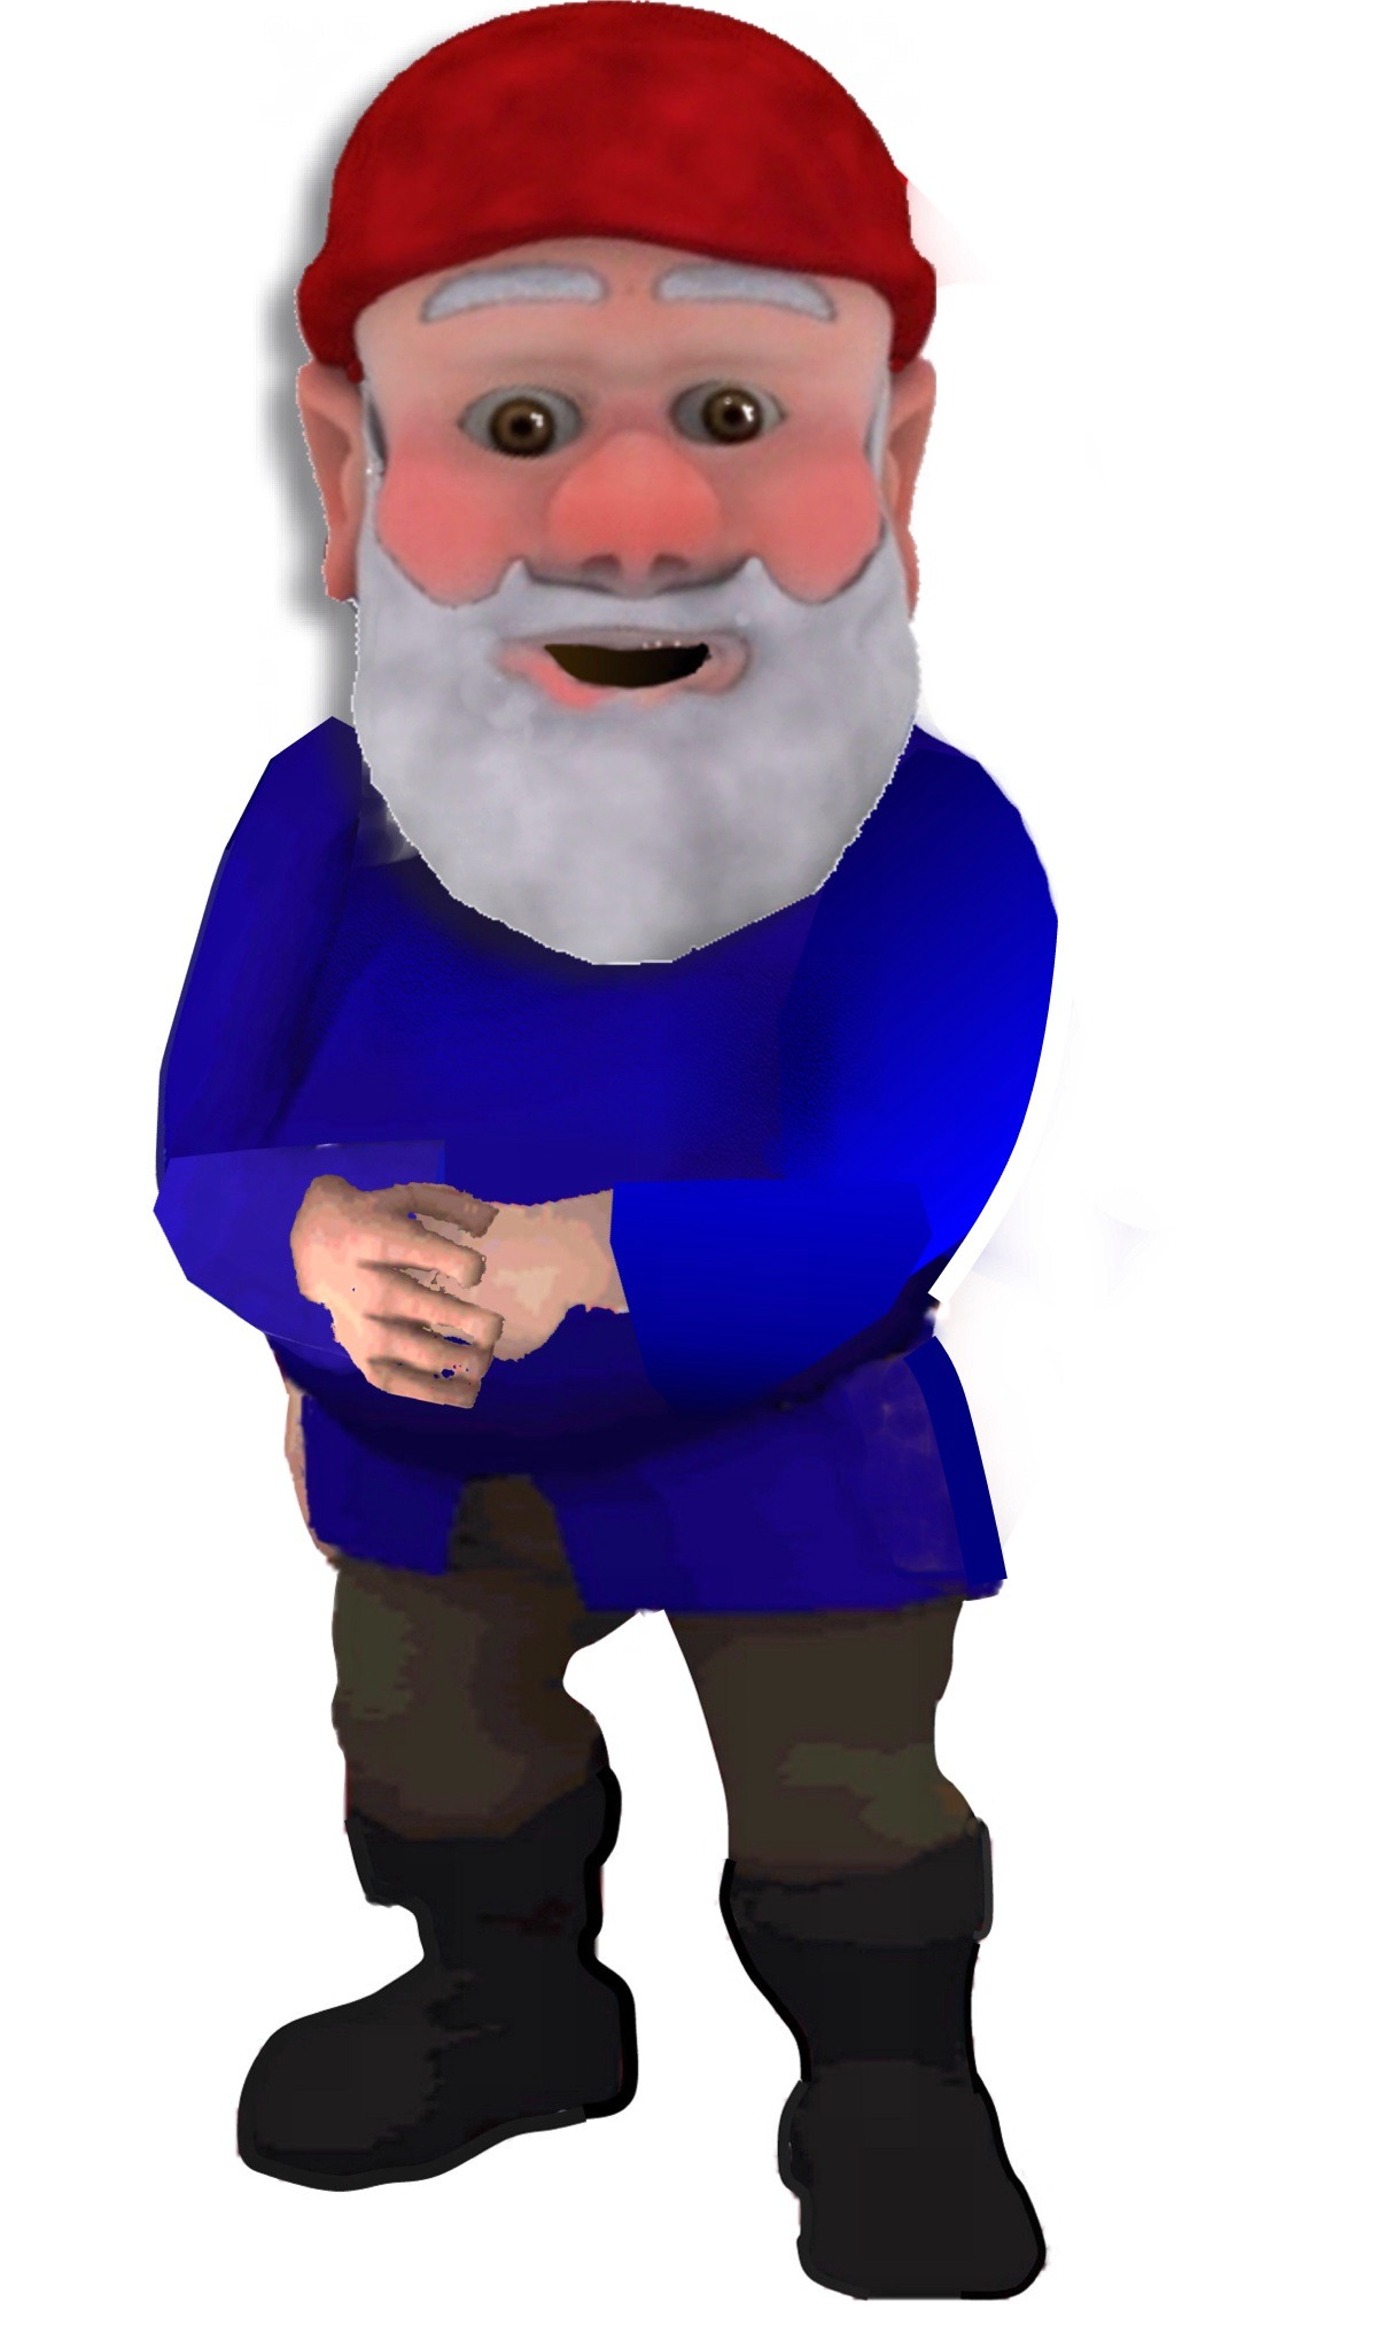 You've been gnomed good. 